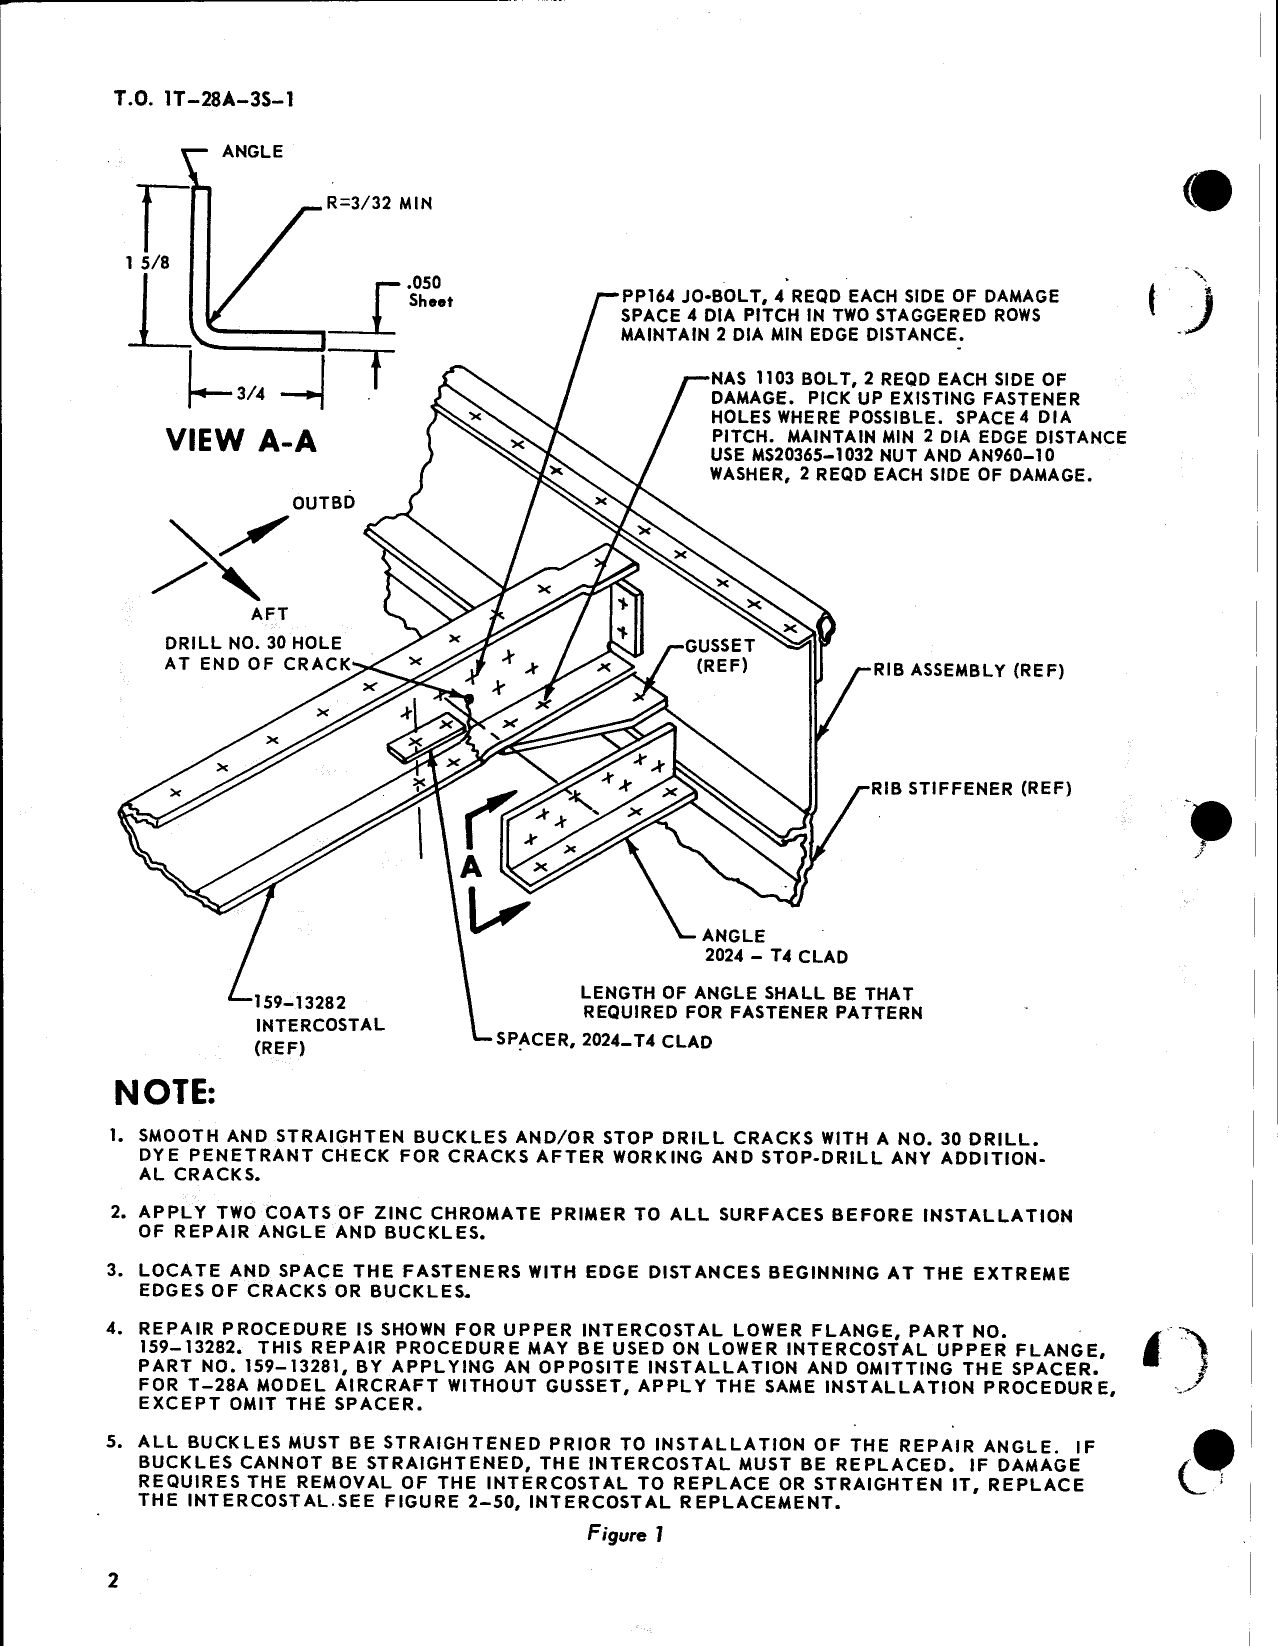 Sample page  4 from AirCorps Library document: Safety Supplement Structural Repair Tech Manual, T-28A T-28B T-28C T-28D